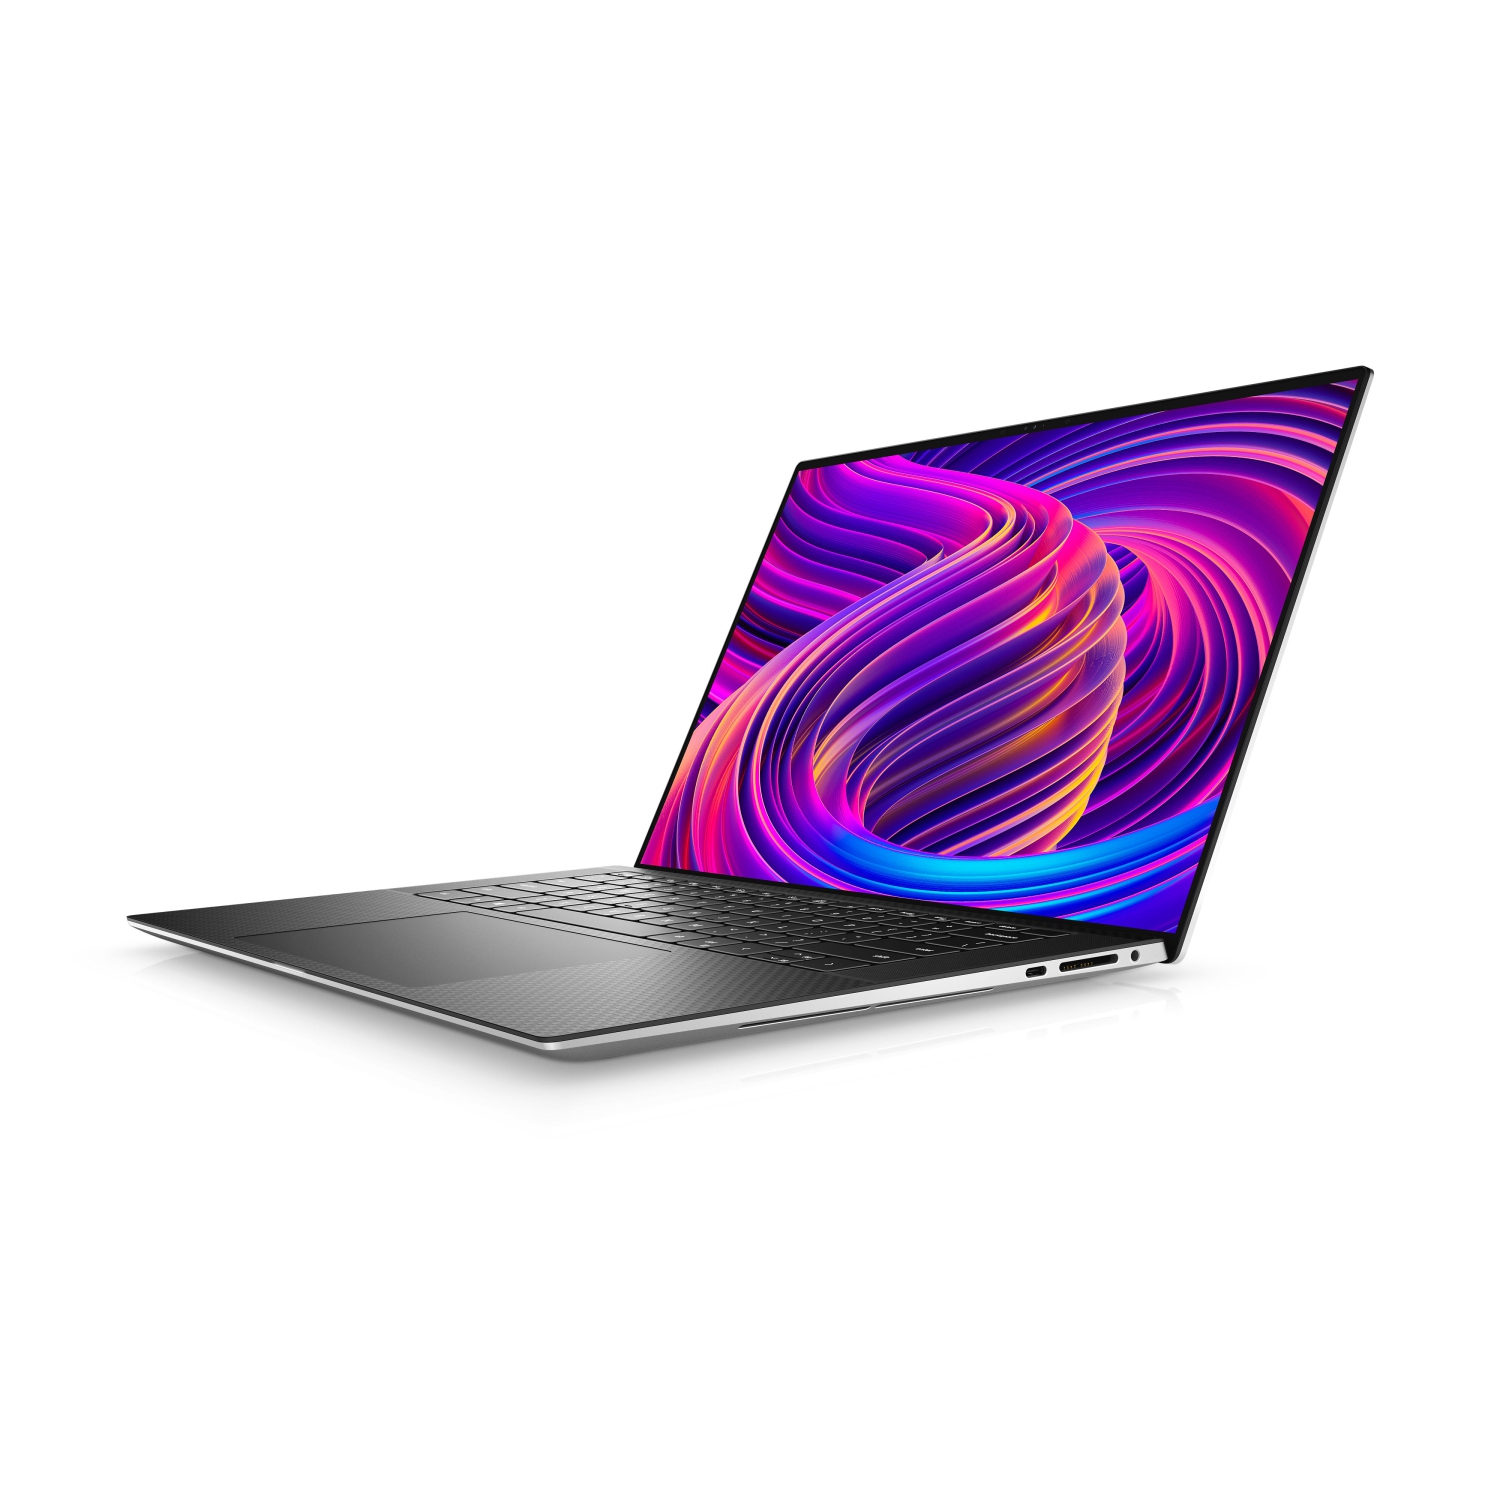 Refurbished (Excellent) - Dell XPS 15 9510 Laptop (2021), 15.6" 4K Touch, Core i9 - 1TB SSD - 64GB RAM - 3050 Ti, 8 Cores @ 4.9 GHz - 11th Gen CPU Certified Refurbished